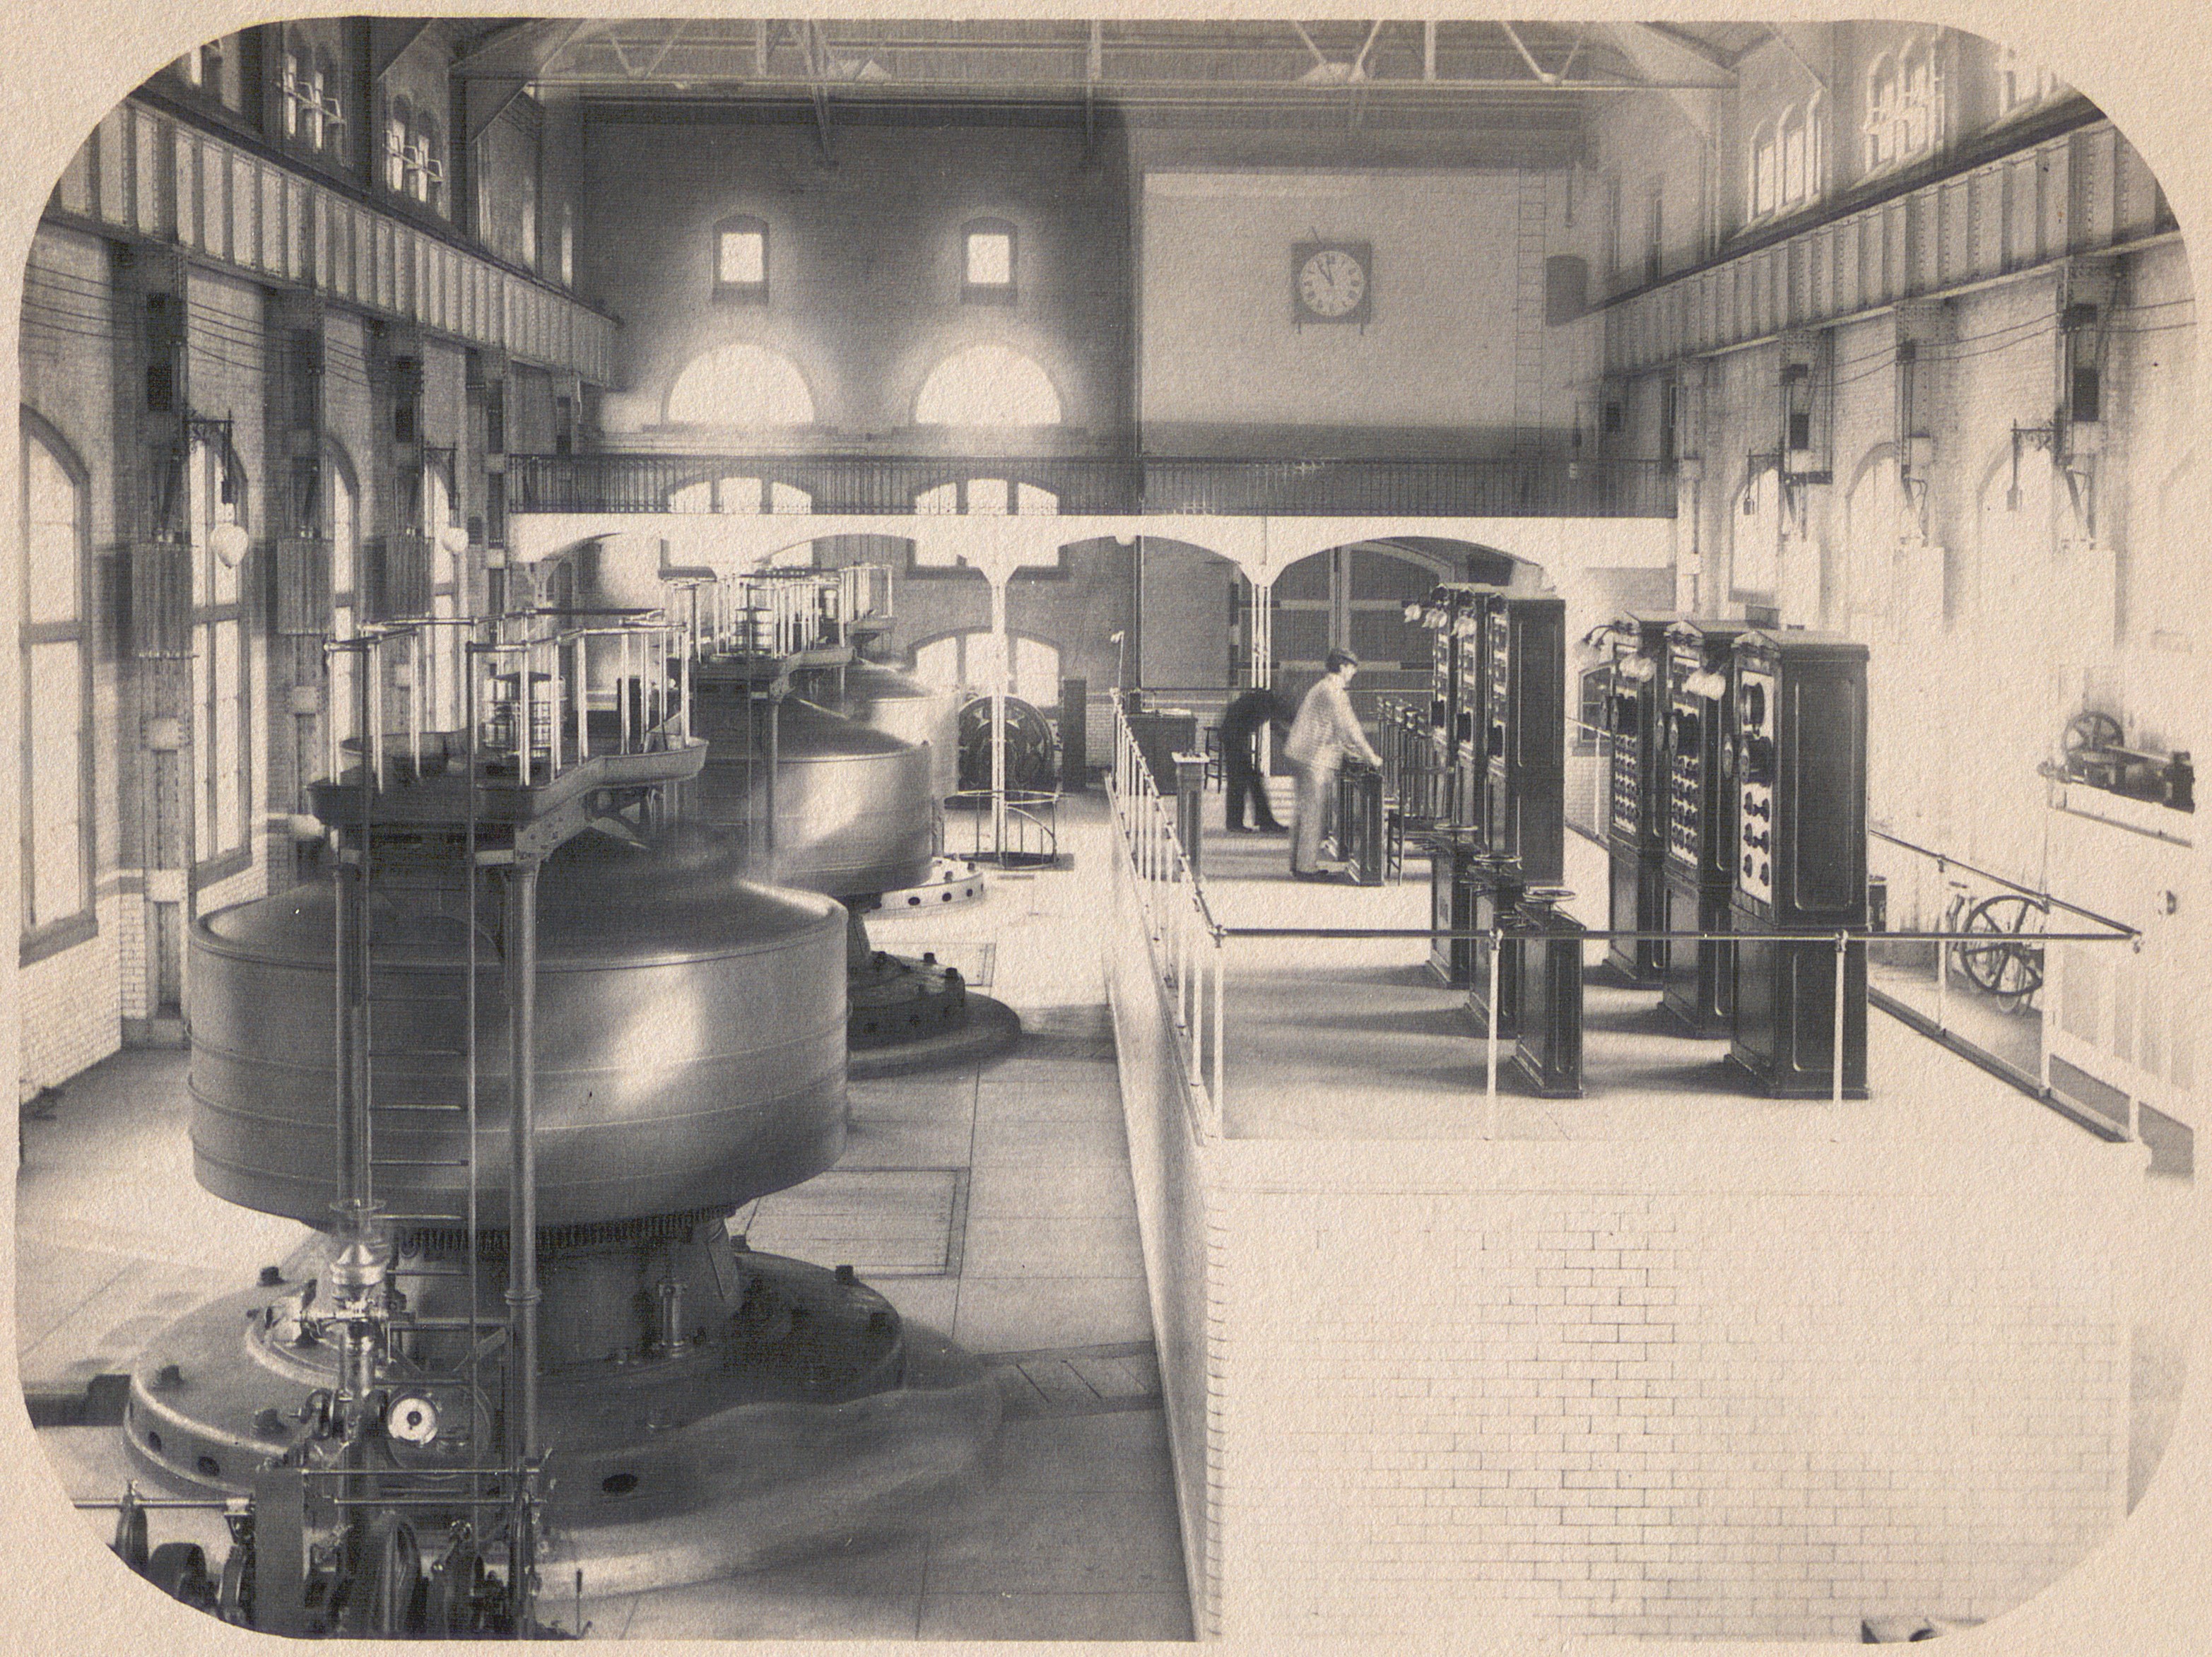 Interior view of a late 19th century hydroelectric power plant.